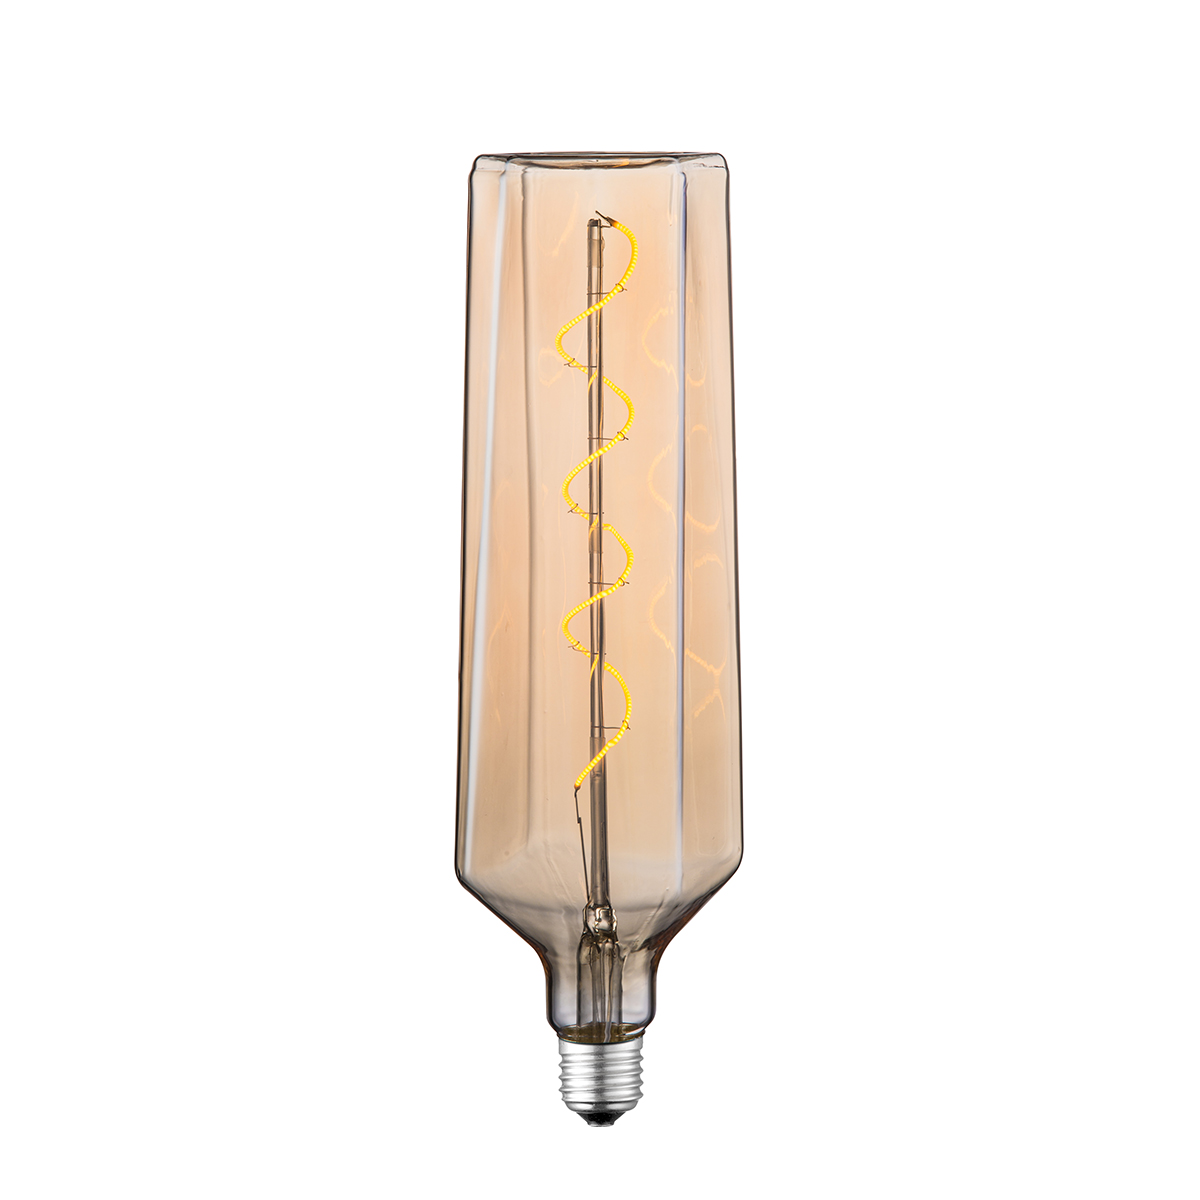 Tangla lighting - TLB-8109-04AM - LED Light Bulb Single Spiral filament - special 4W amber - popsicle - dimmable - E27